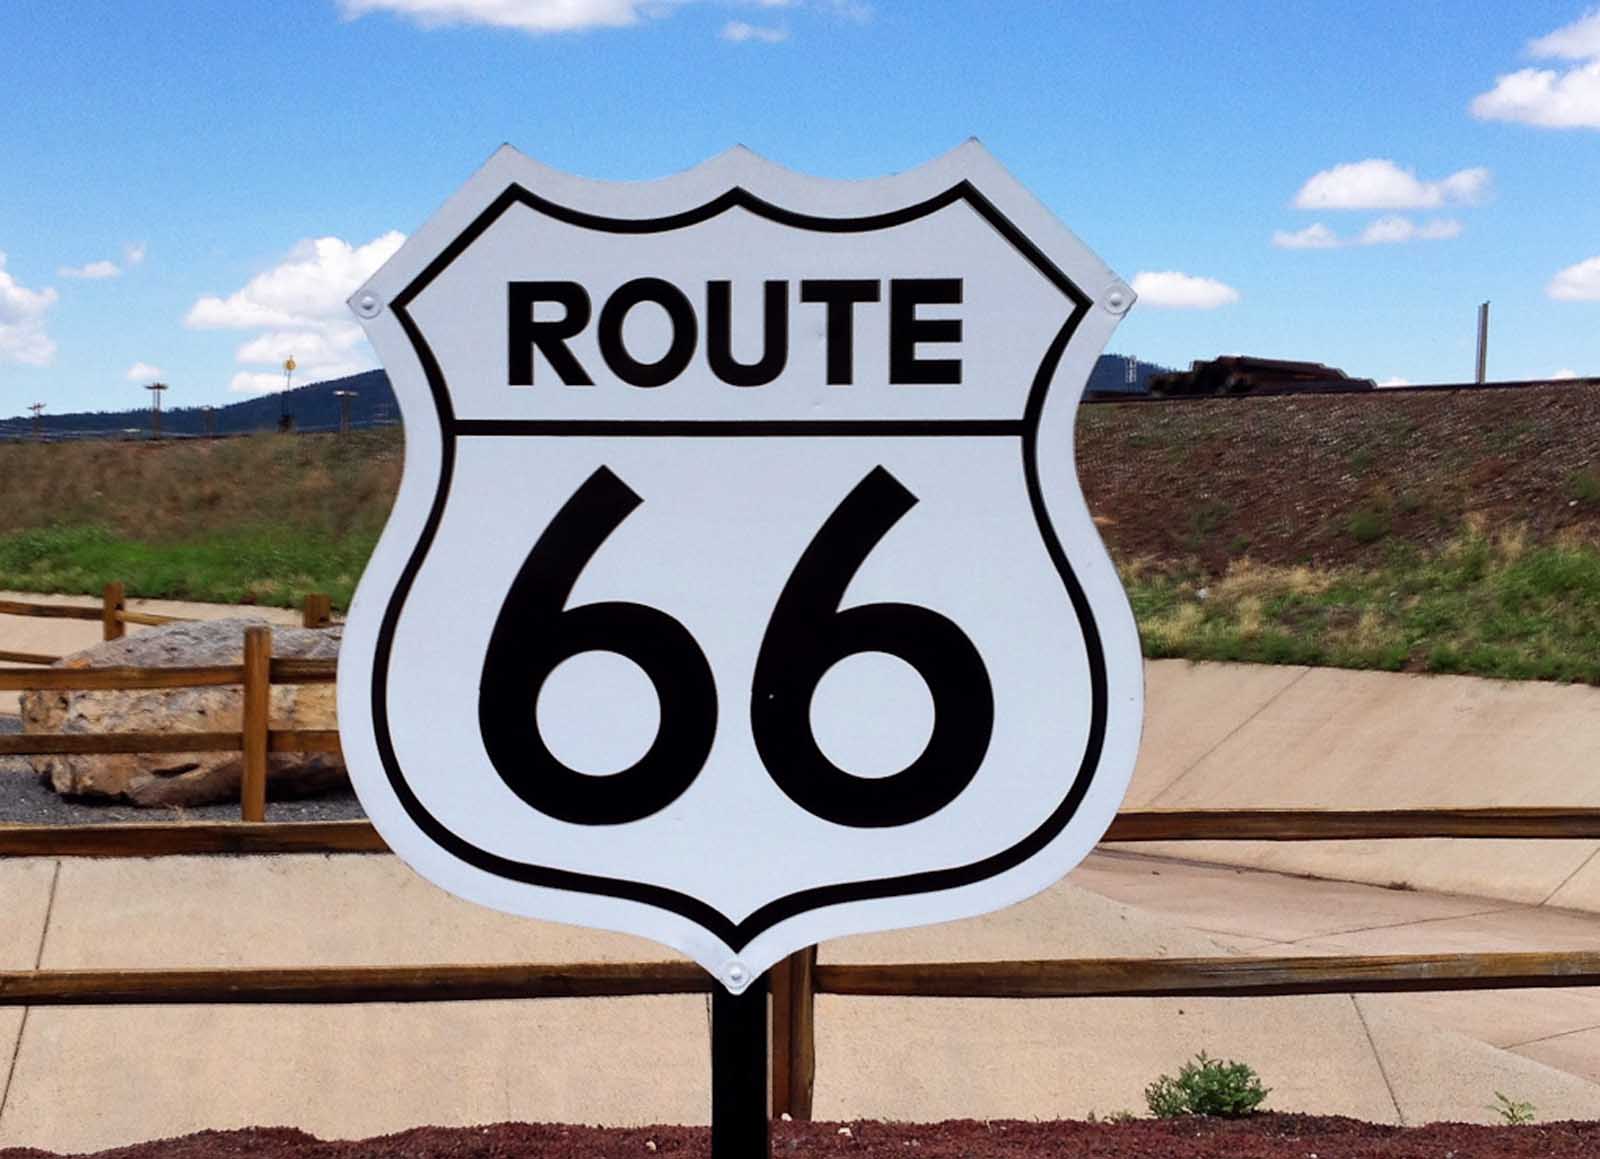 historic route 66 road trip sign